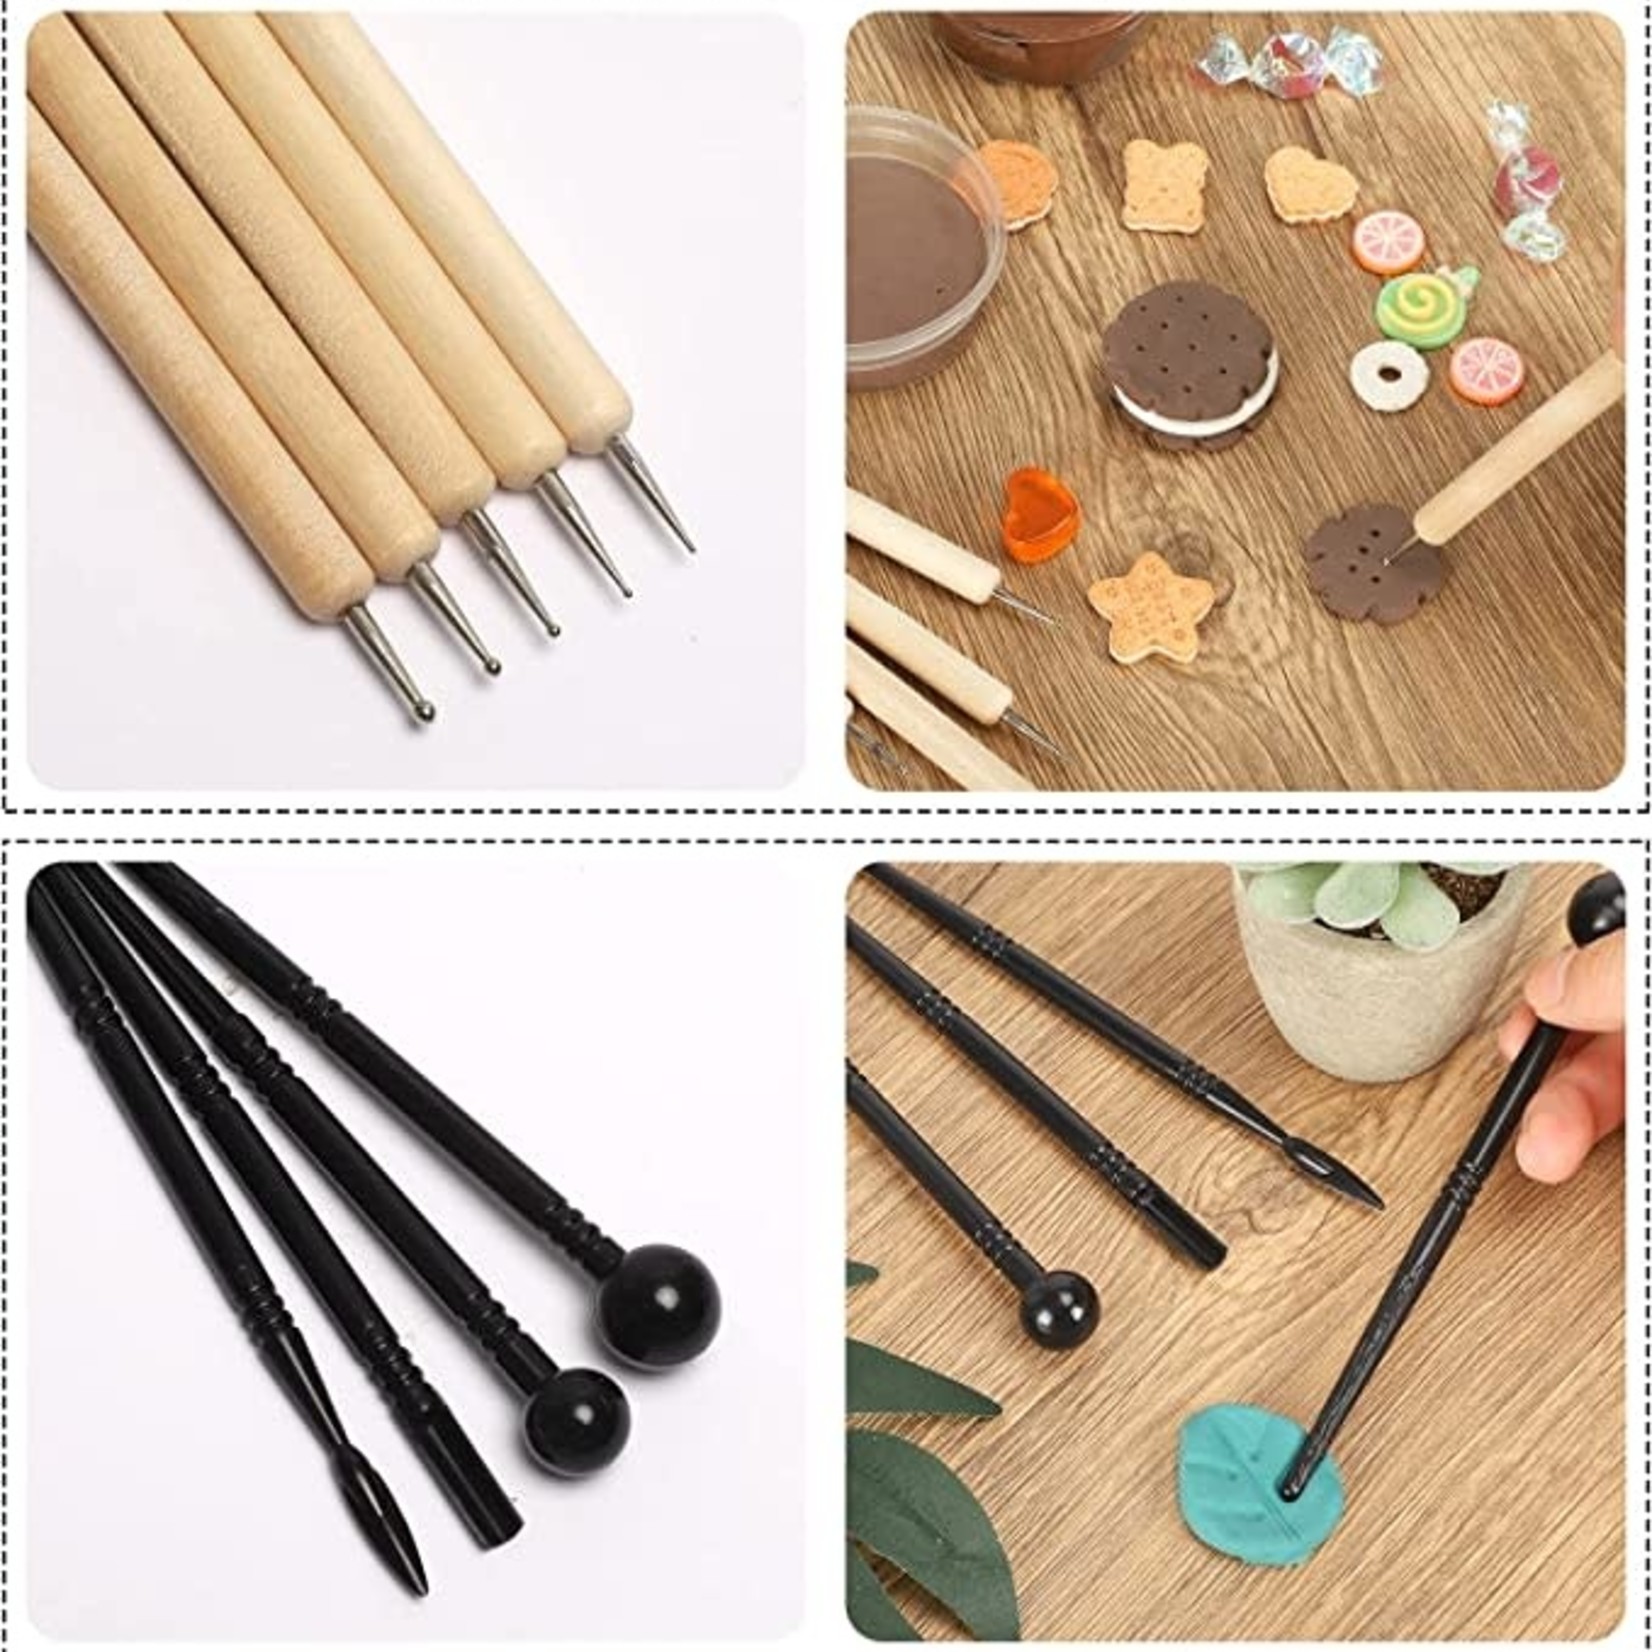 SERONLINE 24pcs Ball Stylus Dotting Tools Polymer Modeling Clay Sculpting Tools Set Rock Painting Kit for Sculpture Pottery